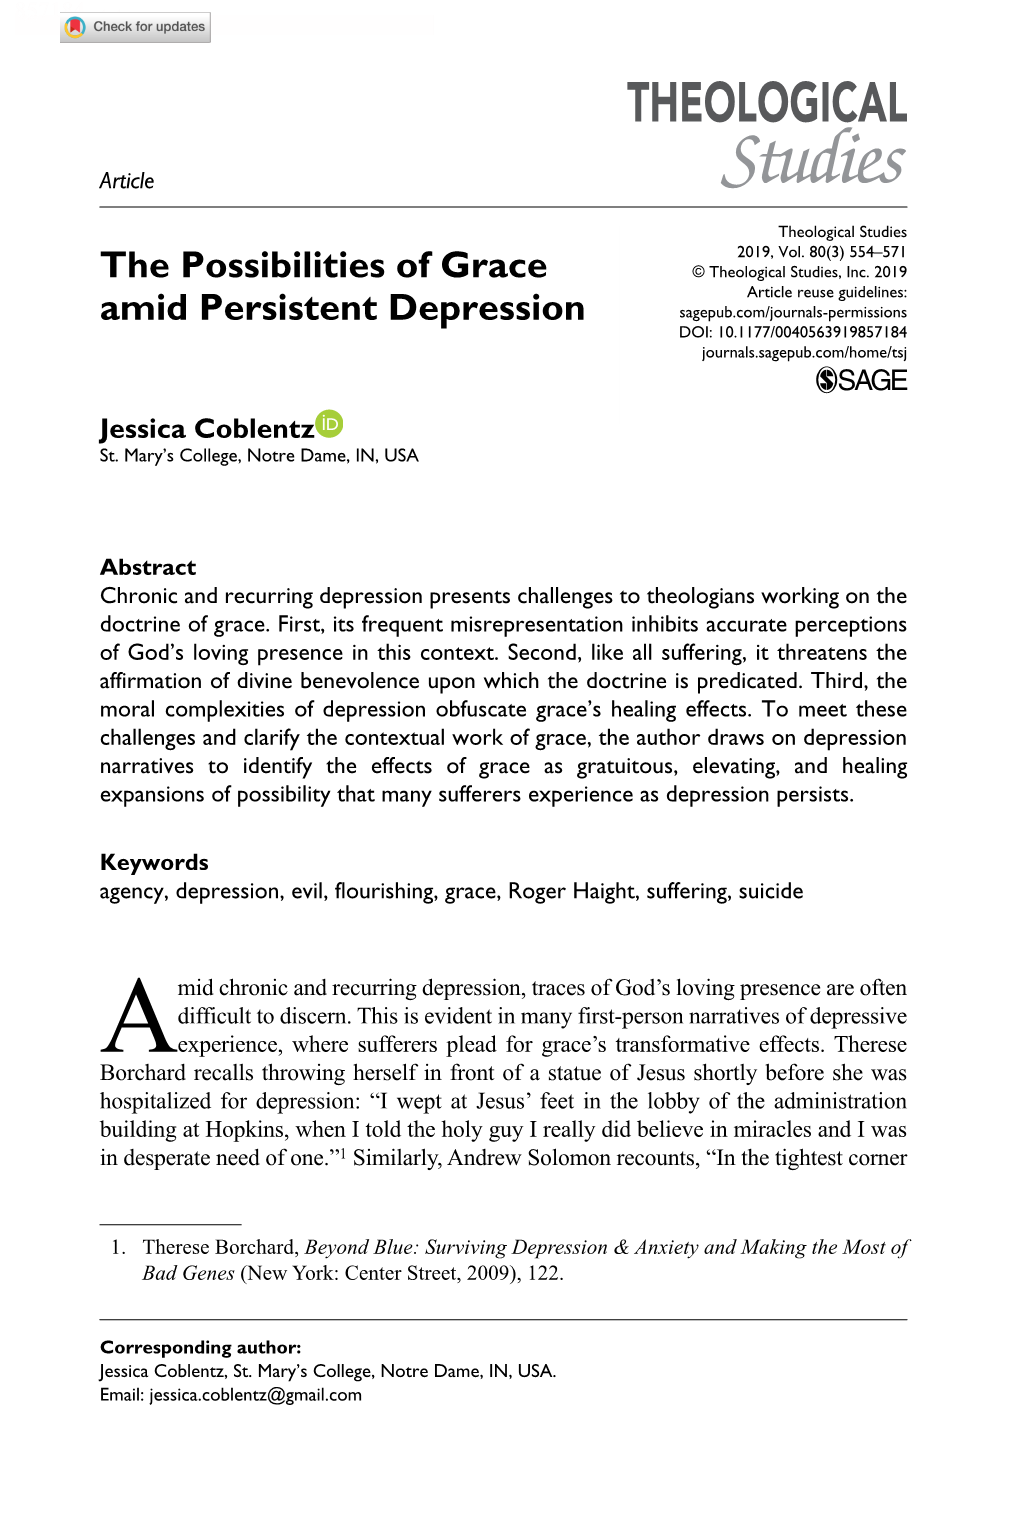 The Possibilities of Grace Amid Persistent Depression 857184Research-Article2019